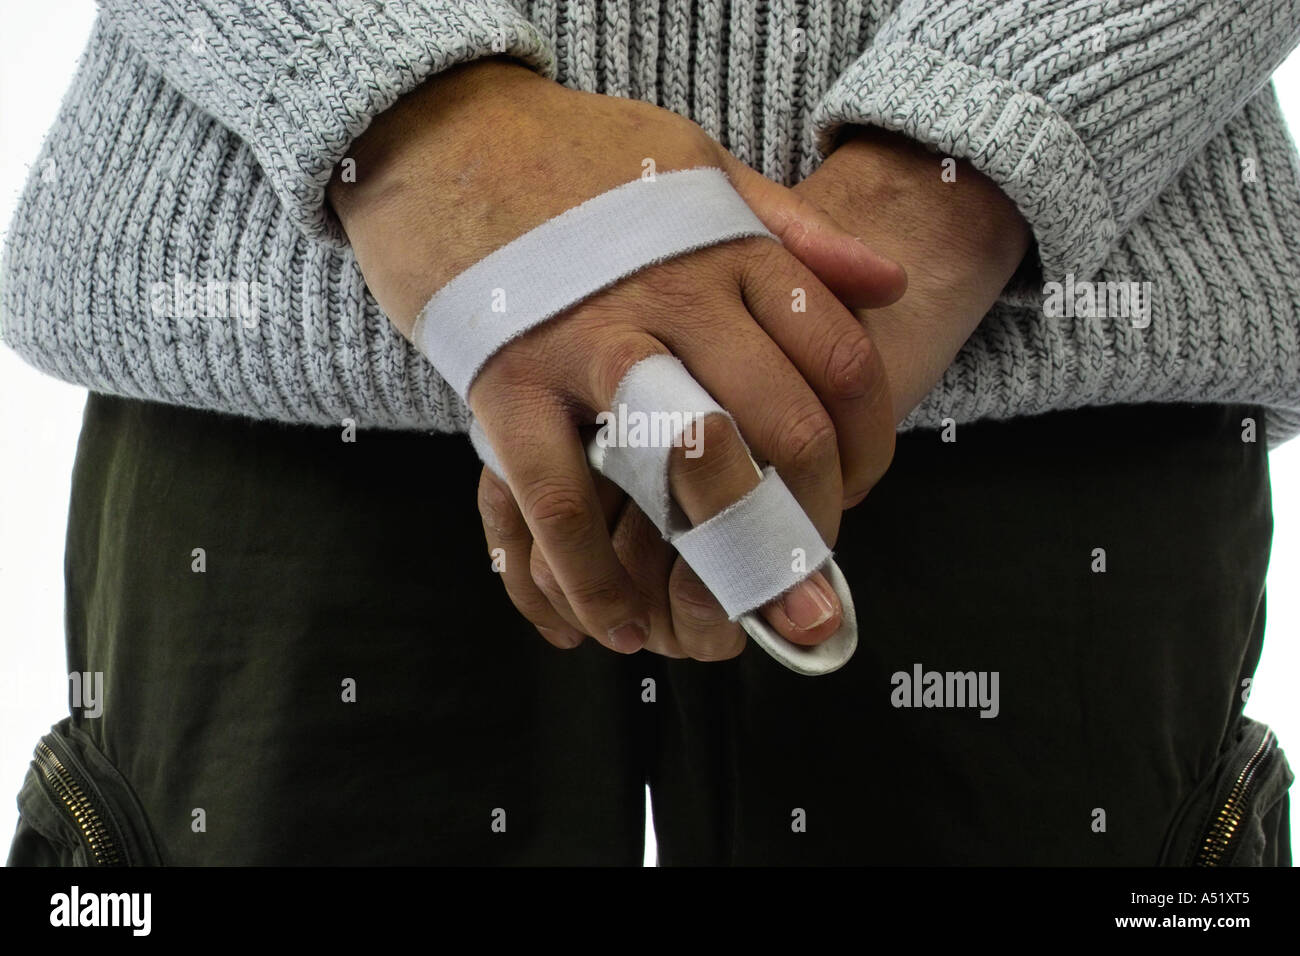 Man with a snapped tendon Stock Photo